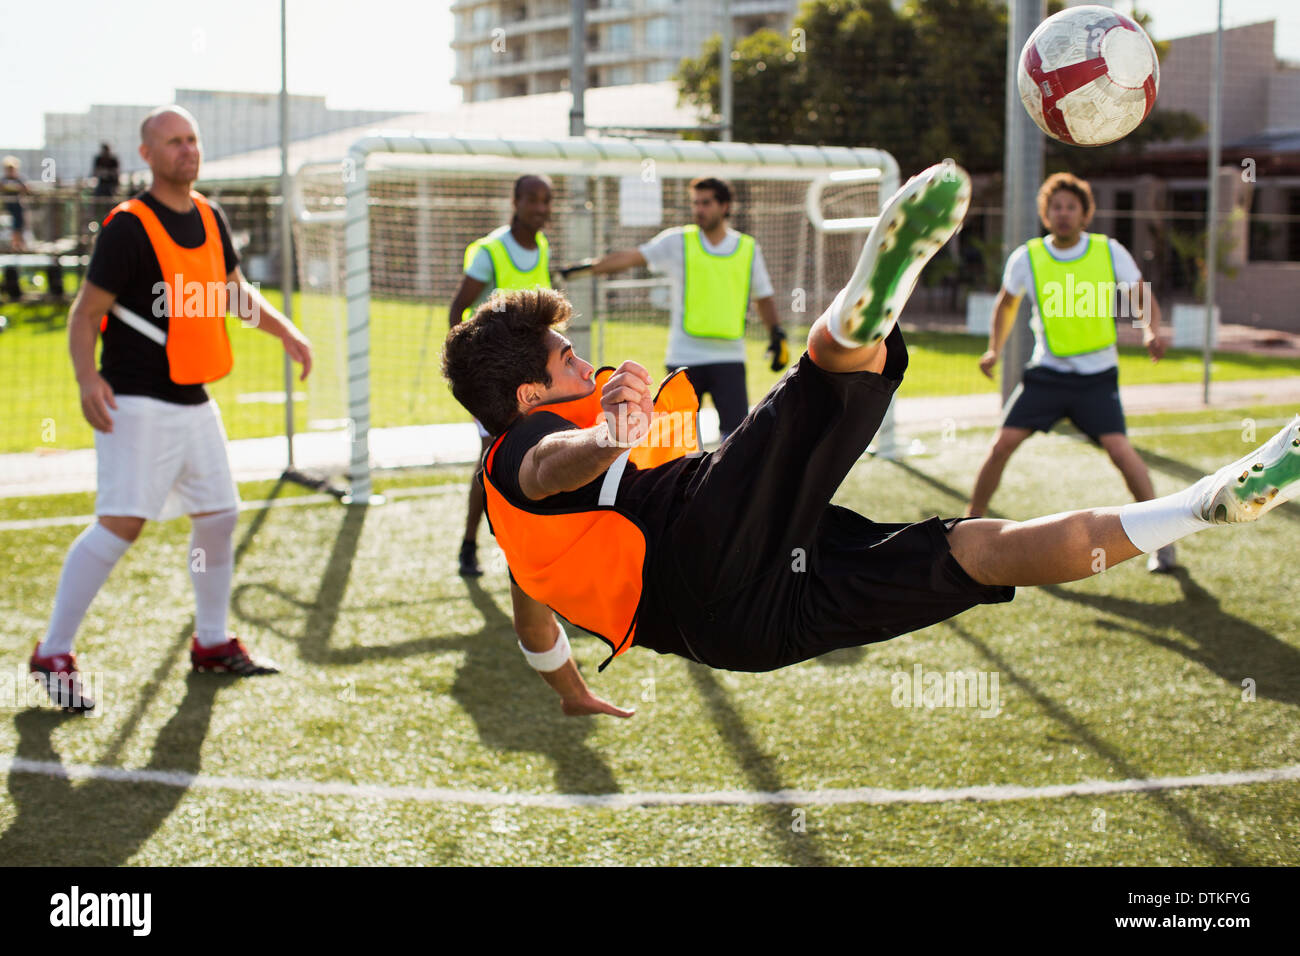 Soccer players training on field Stock Photo